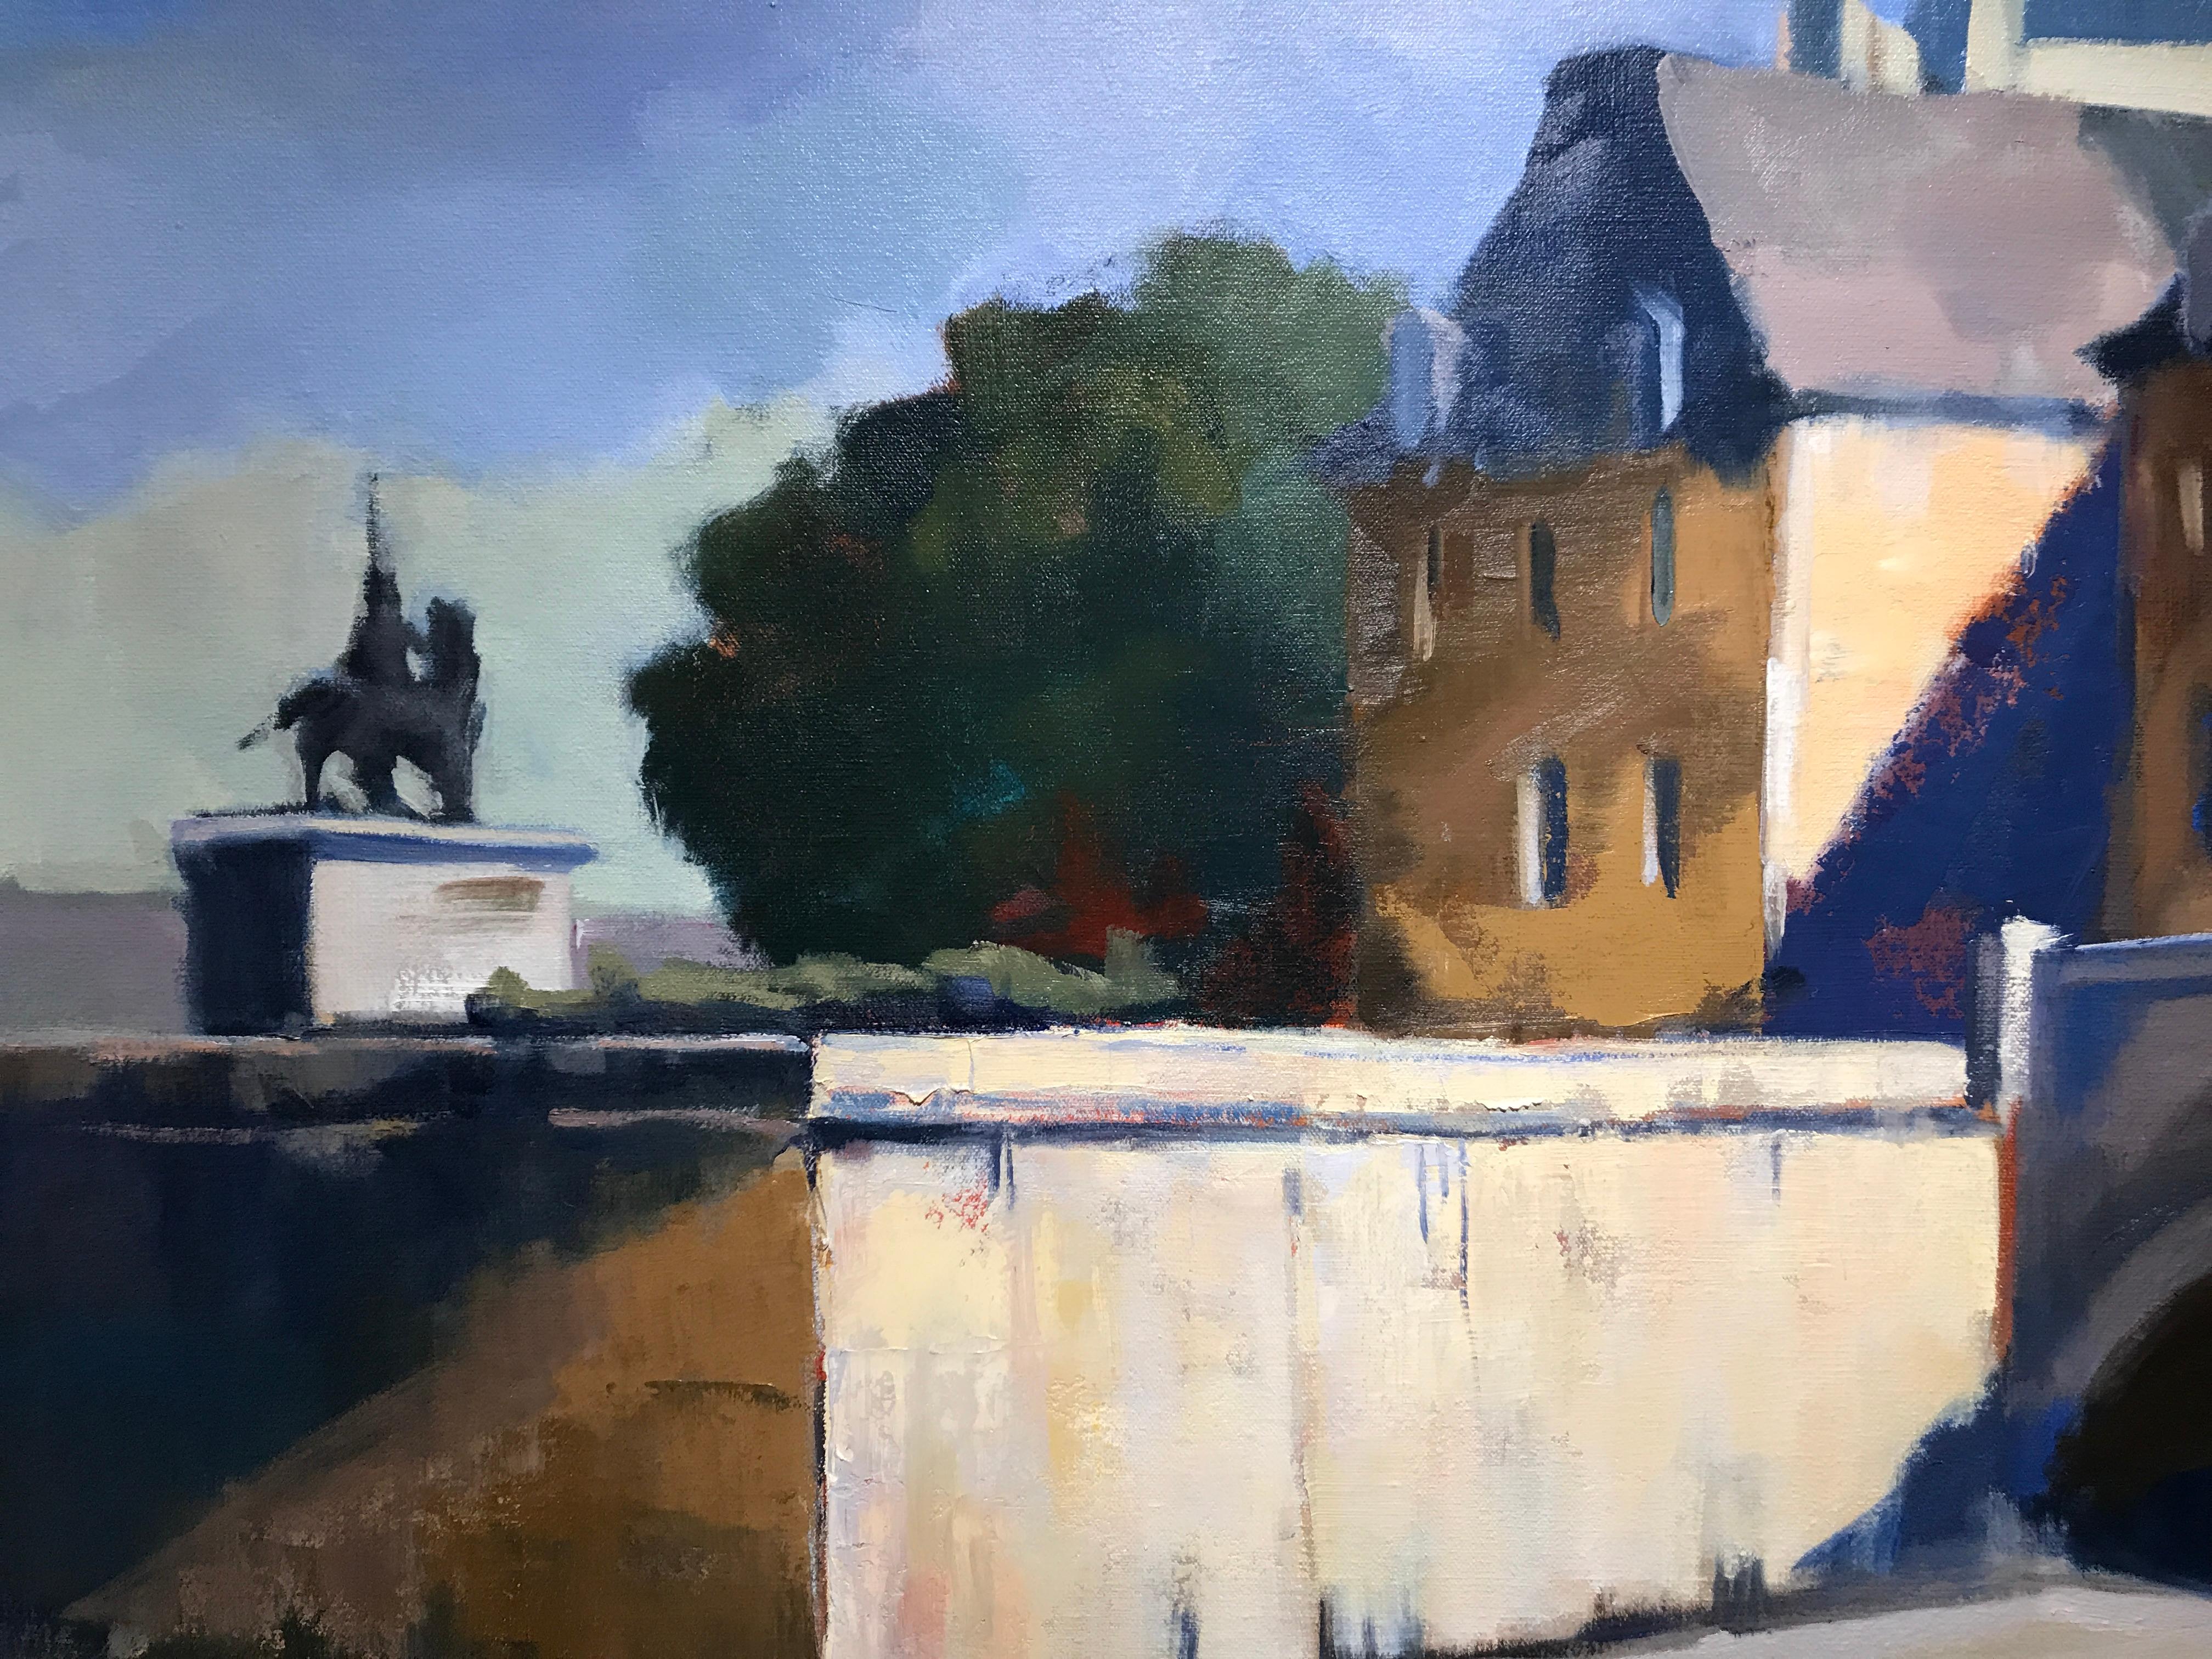 Pont Neuf and Henri IV by Lesley Powell, Square Oil on Canvas Parisian Scene 4